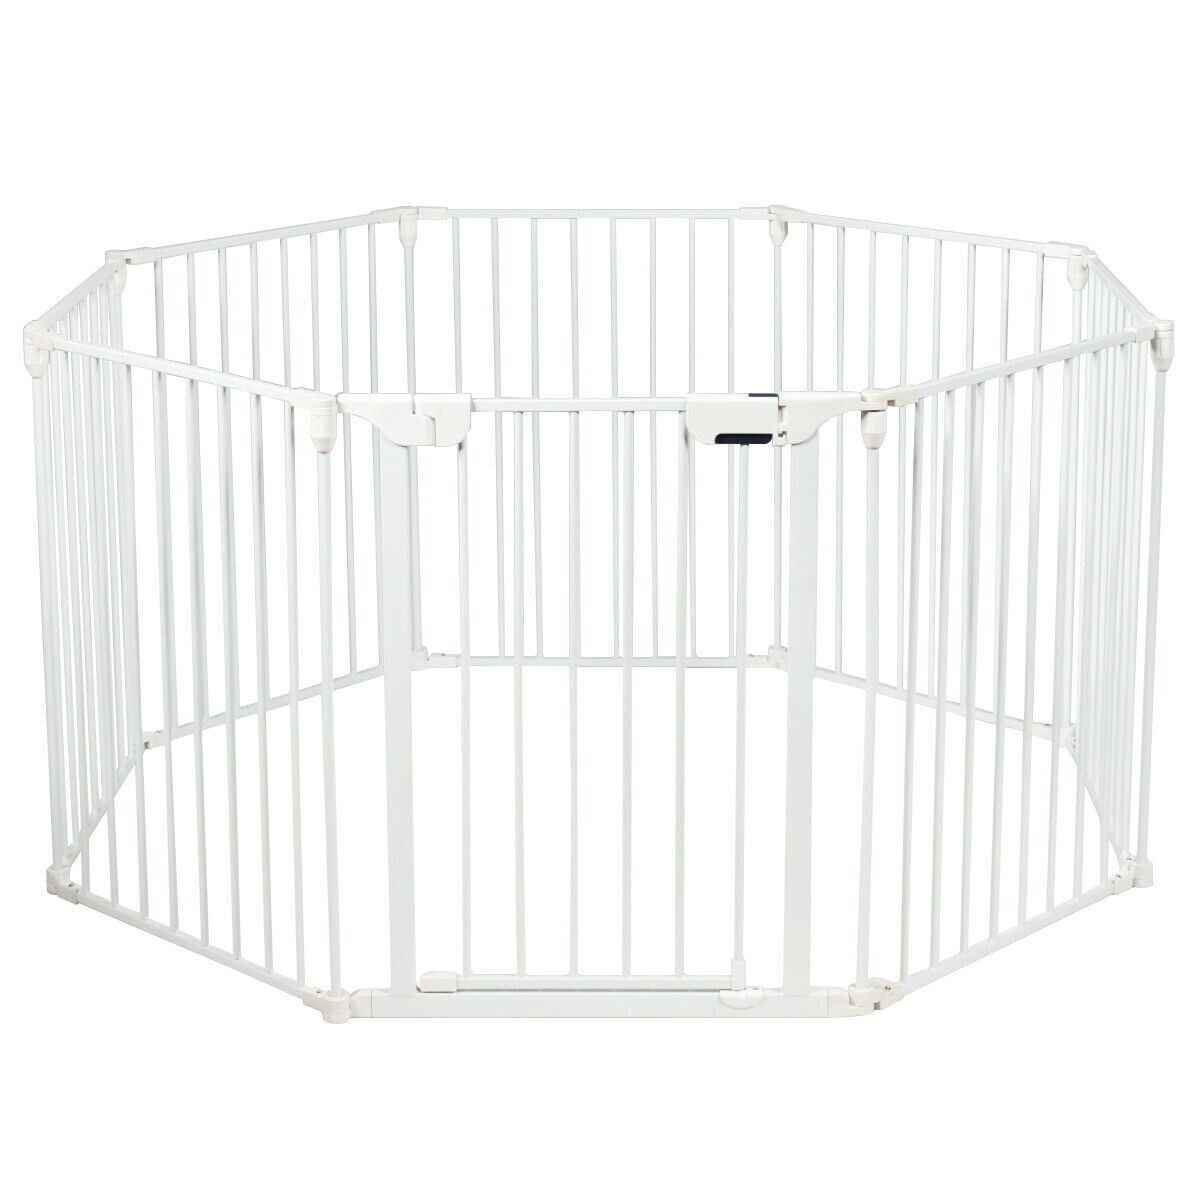 Adjustable  Panel Baby Safe Metal Gate Play Yard-White - Color: White